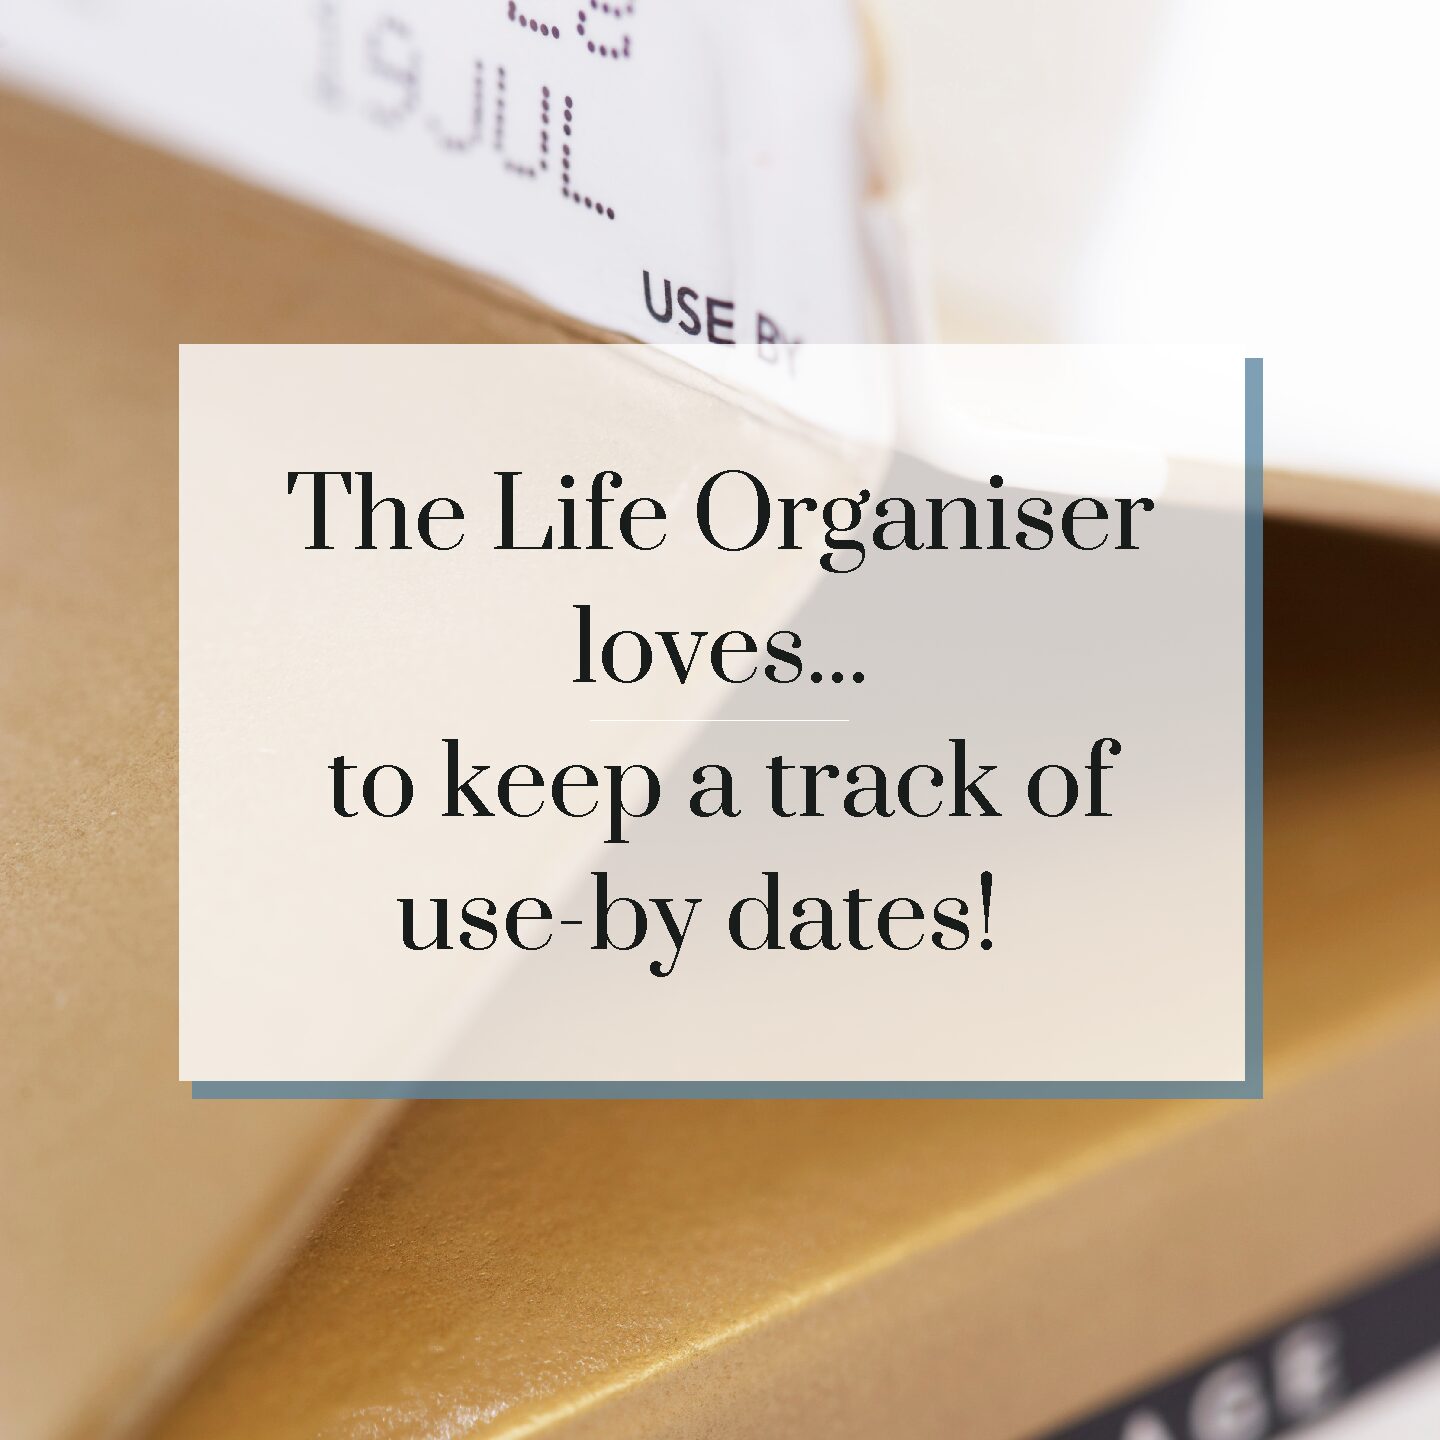 The Life Organiser…loves to keep a track of use-by dates!